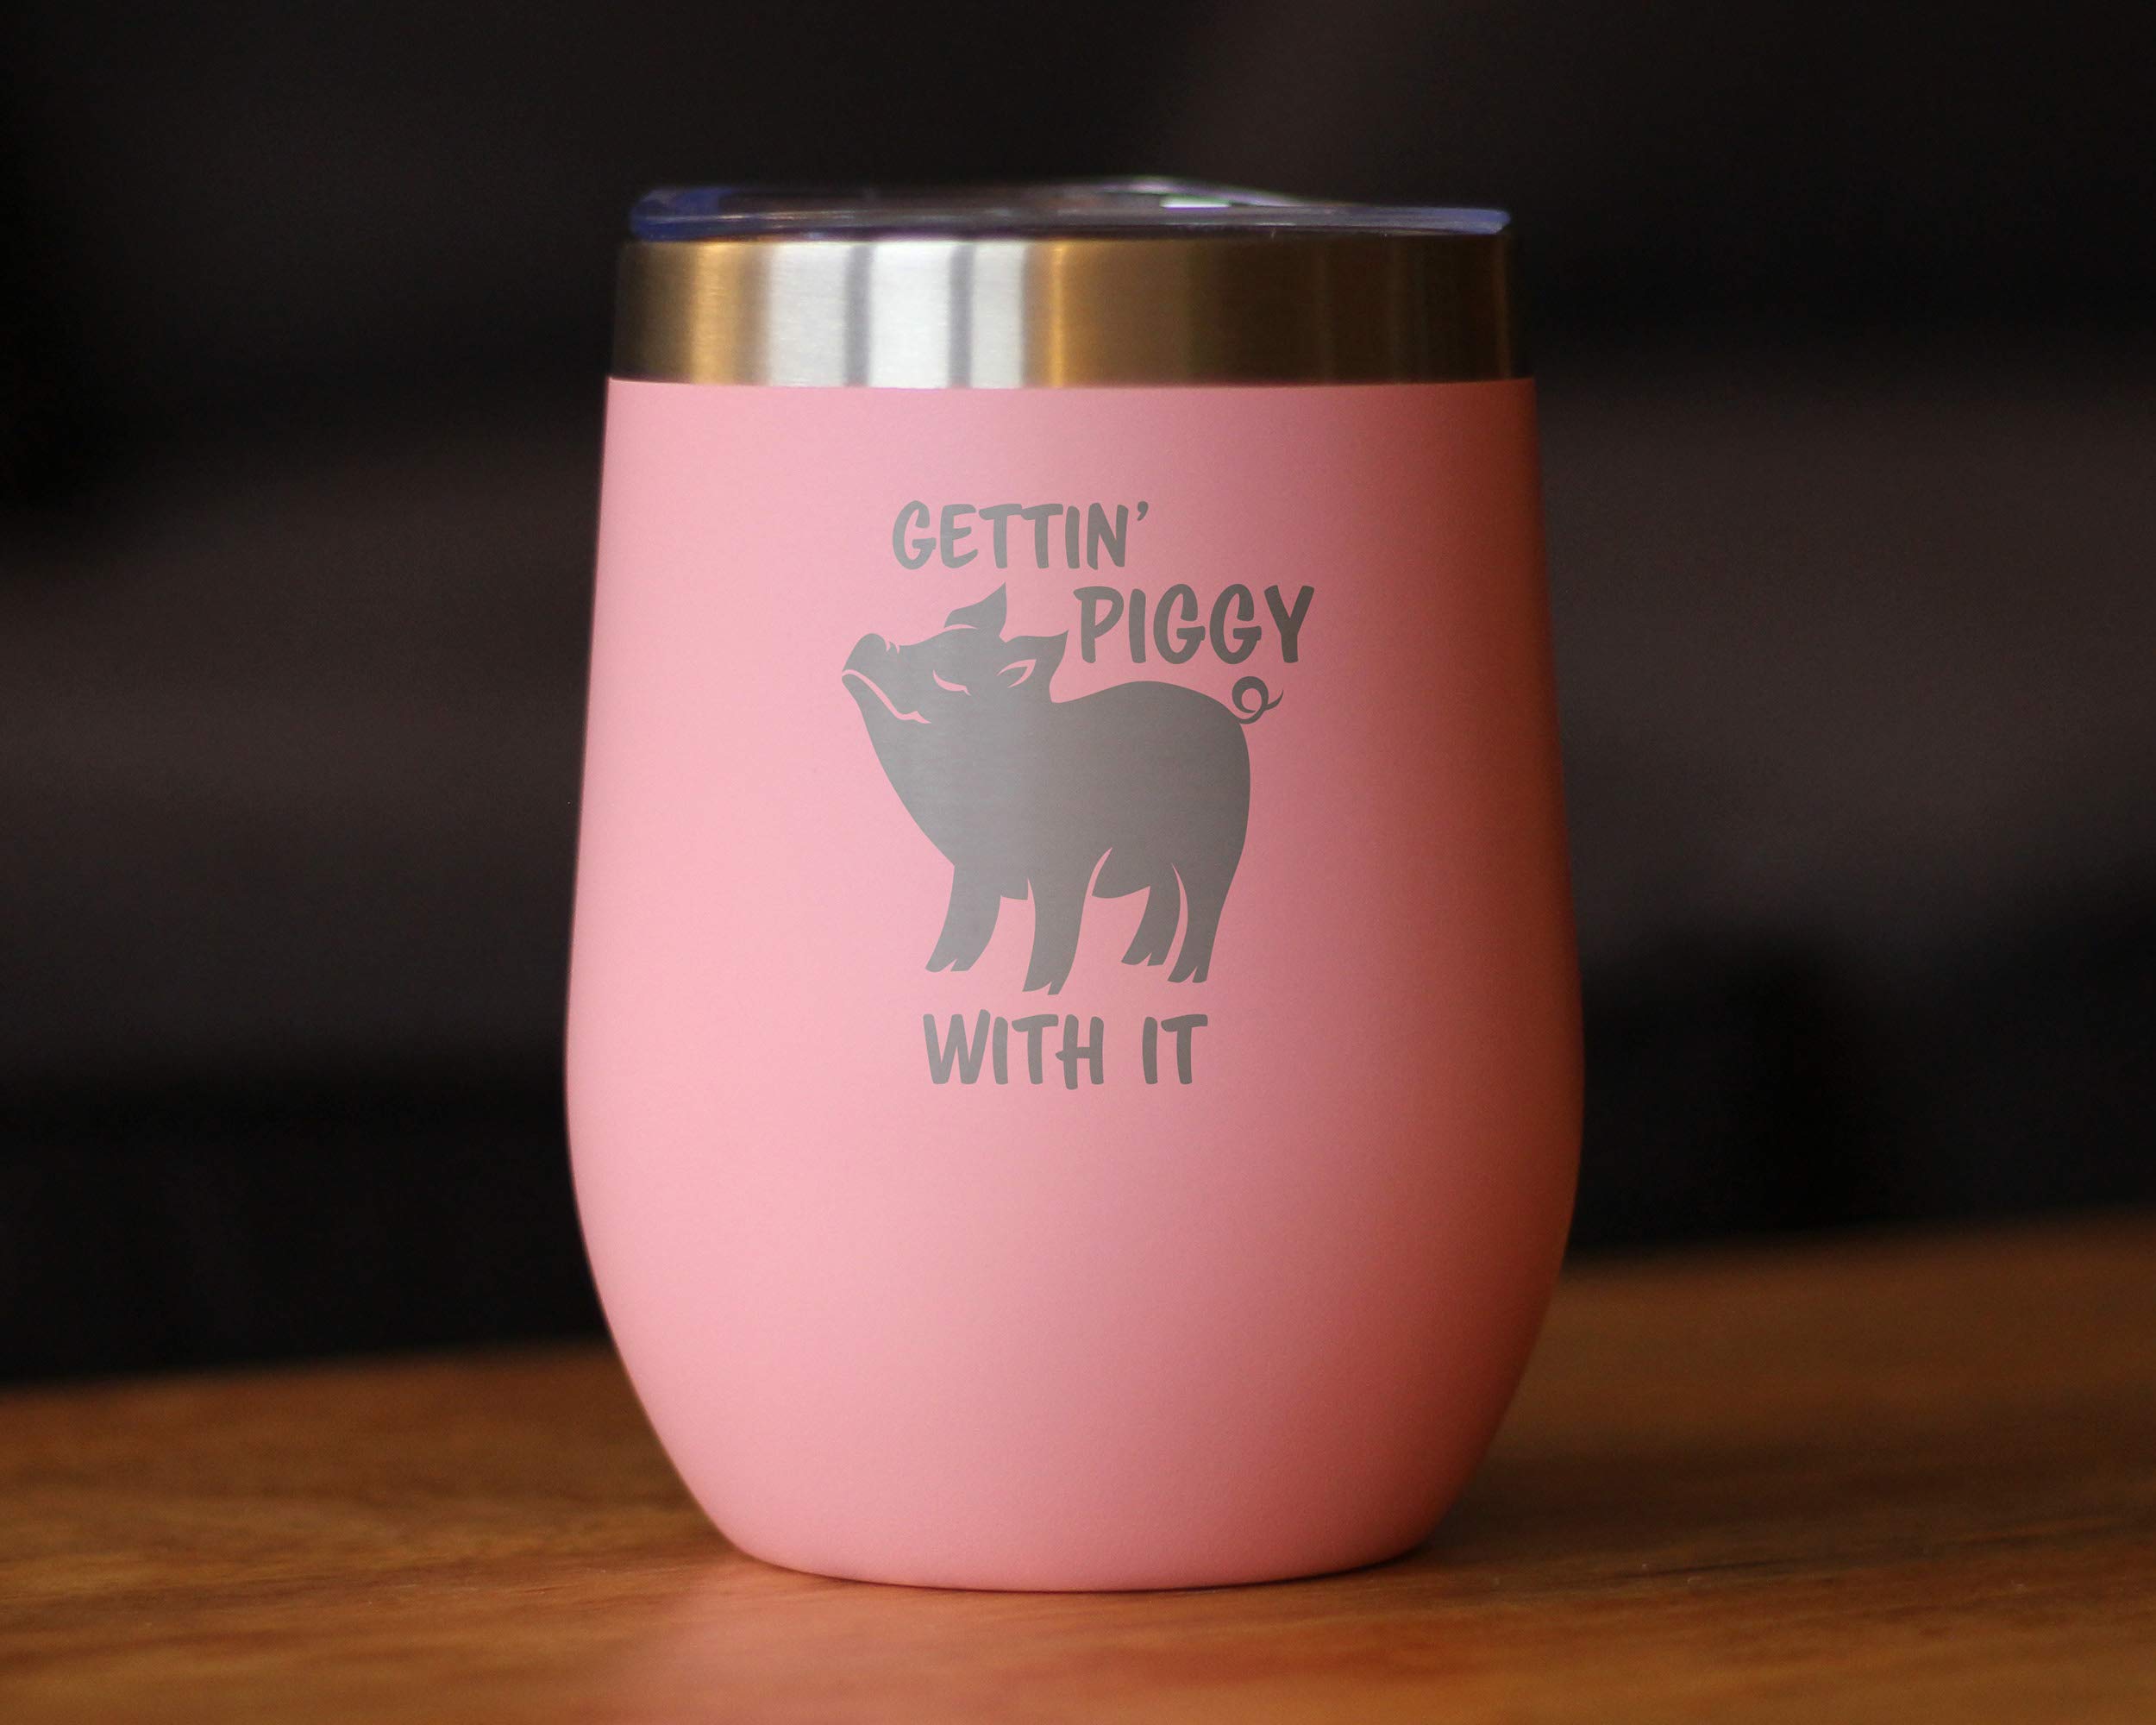 Bevvee Gettin Piggy - Wine Tumbler Glass with Sliding Lid - Stainless Steel Insulated Mug - Cute Pig Decor Gifts - Pink